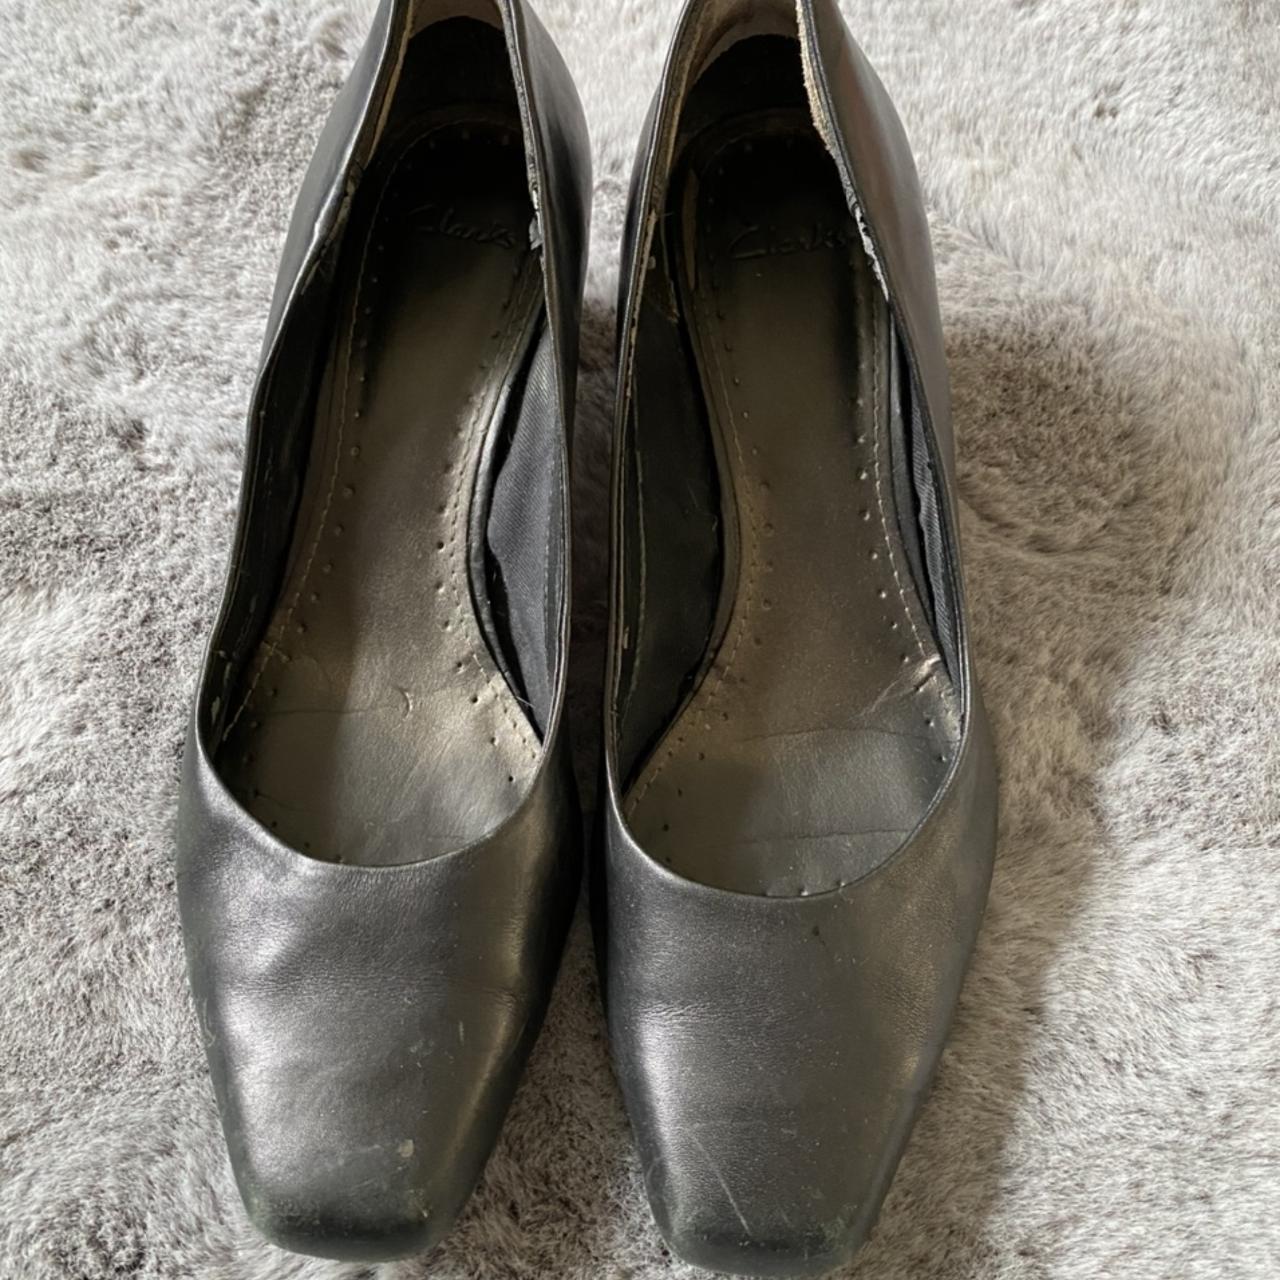 Used worn cabin crew leather court shoes. Have been... - Depop